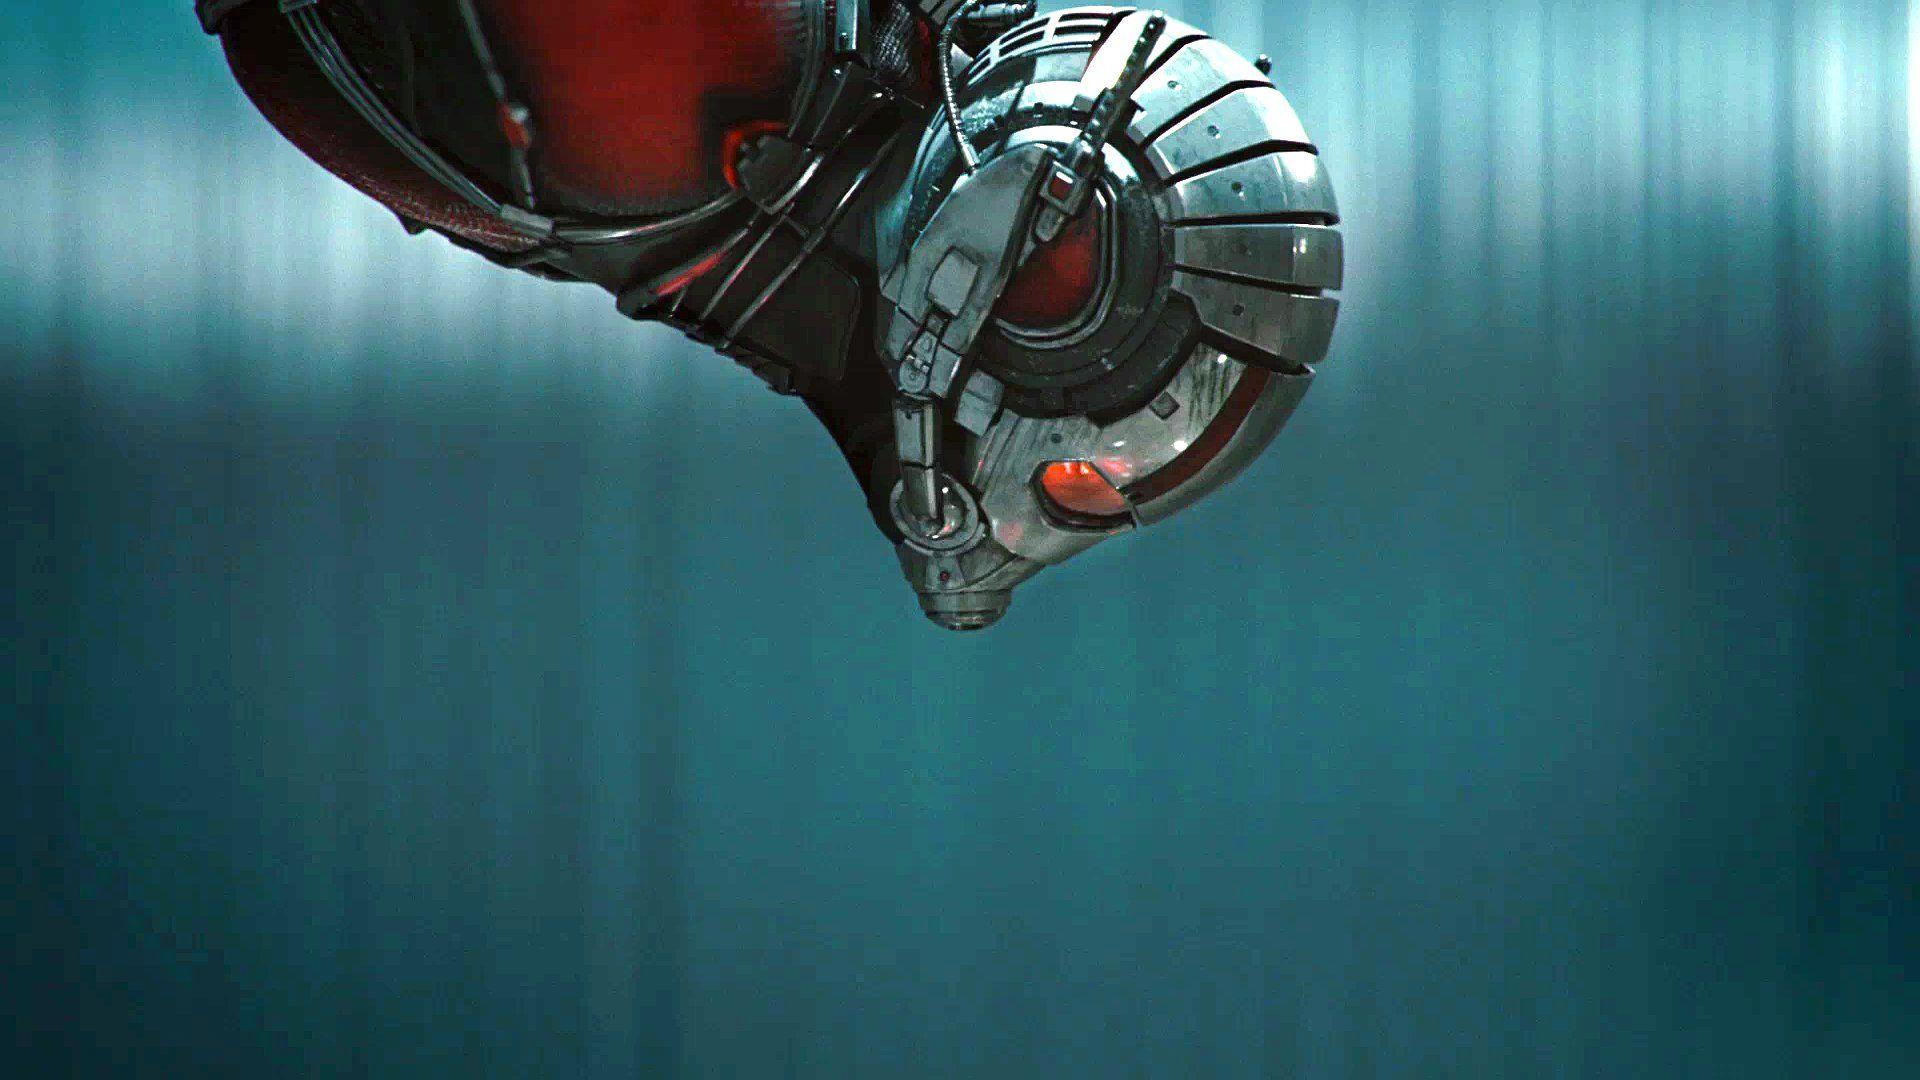 Ant Man Wallpaper. Ant Man Background and Image 47